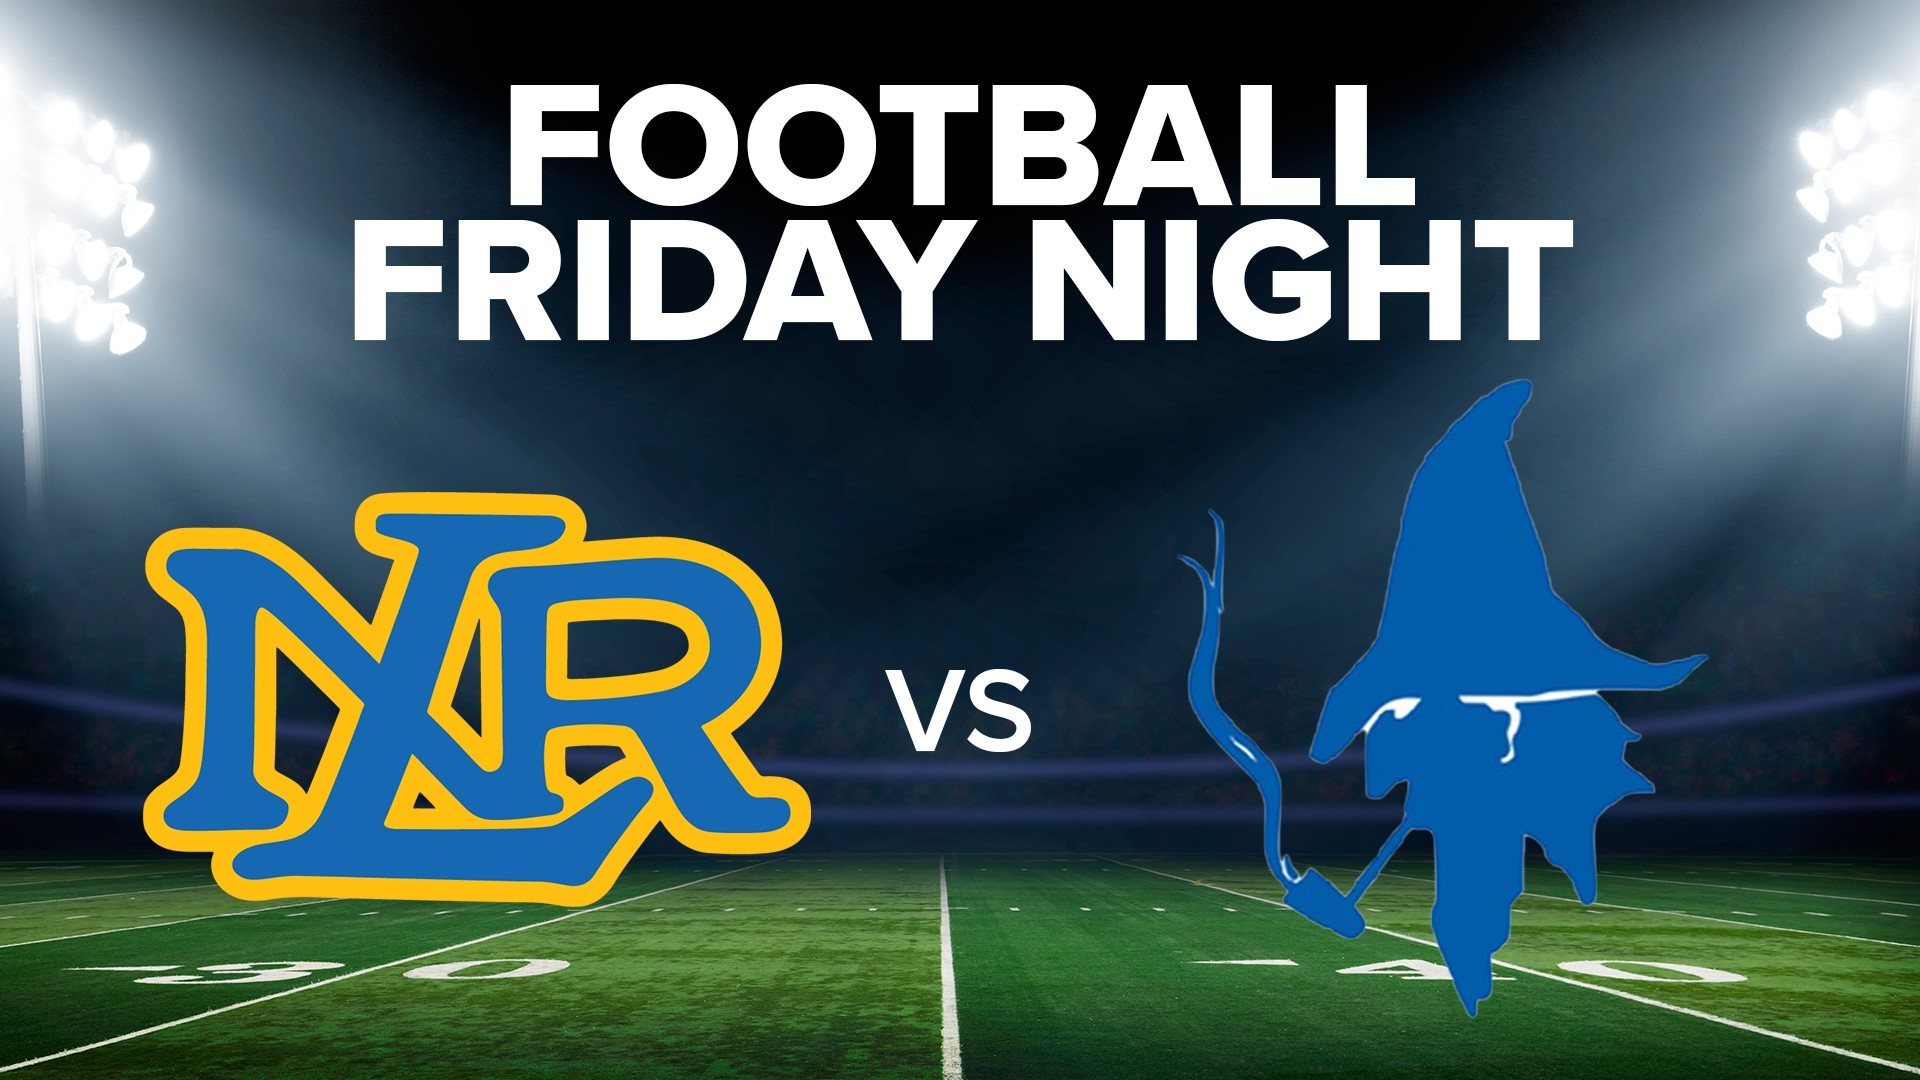 Rogers takes down NLR 44-6 | 5NEWS Football Friday Night